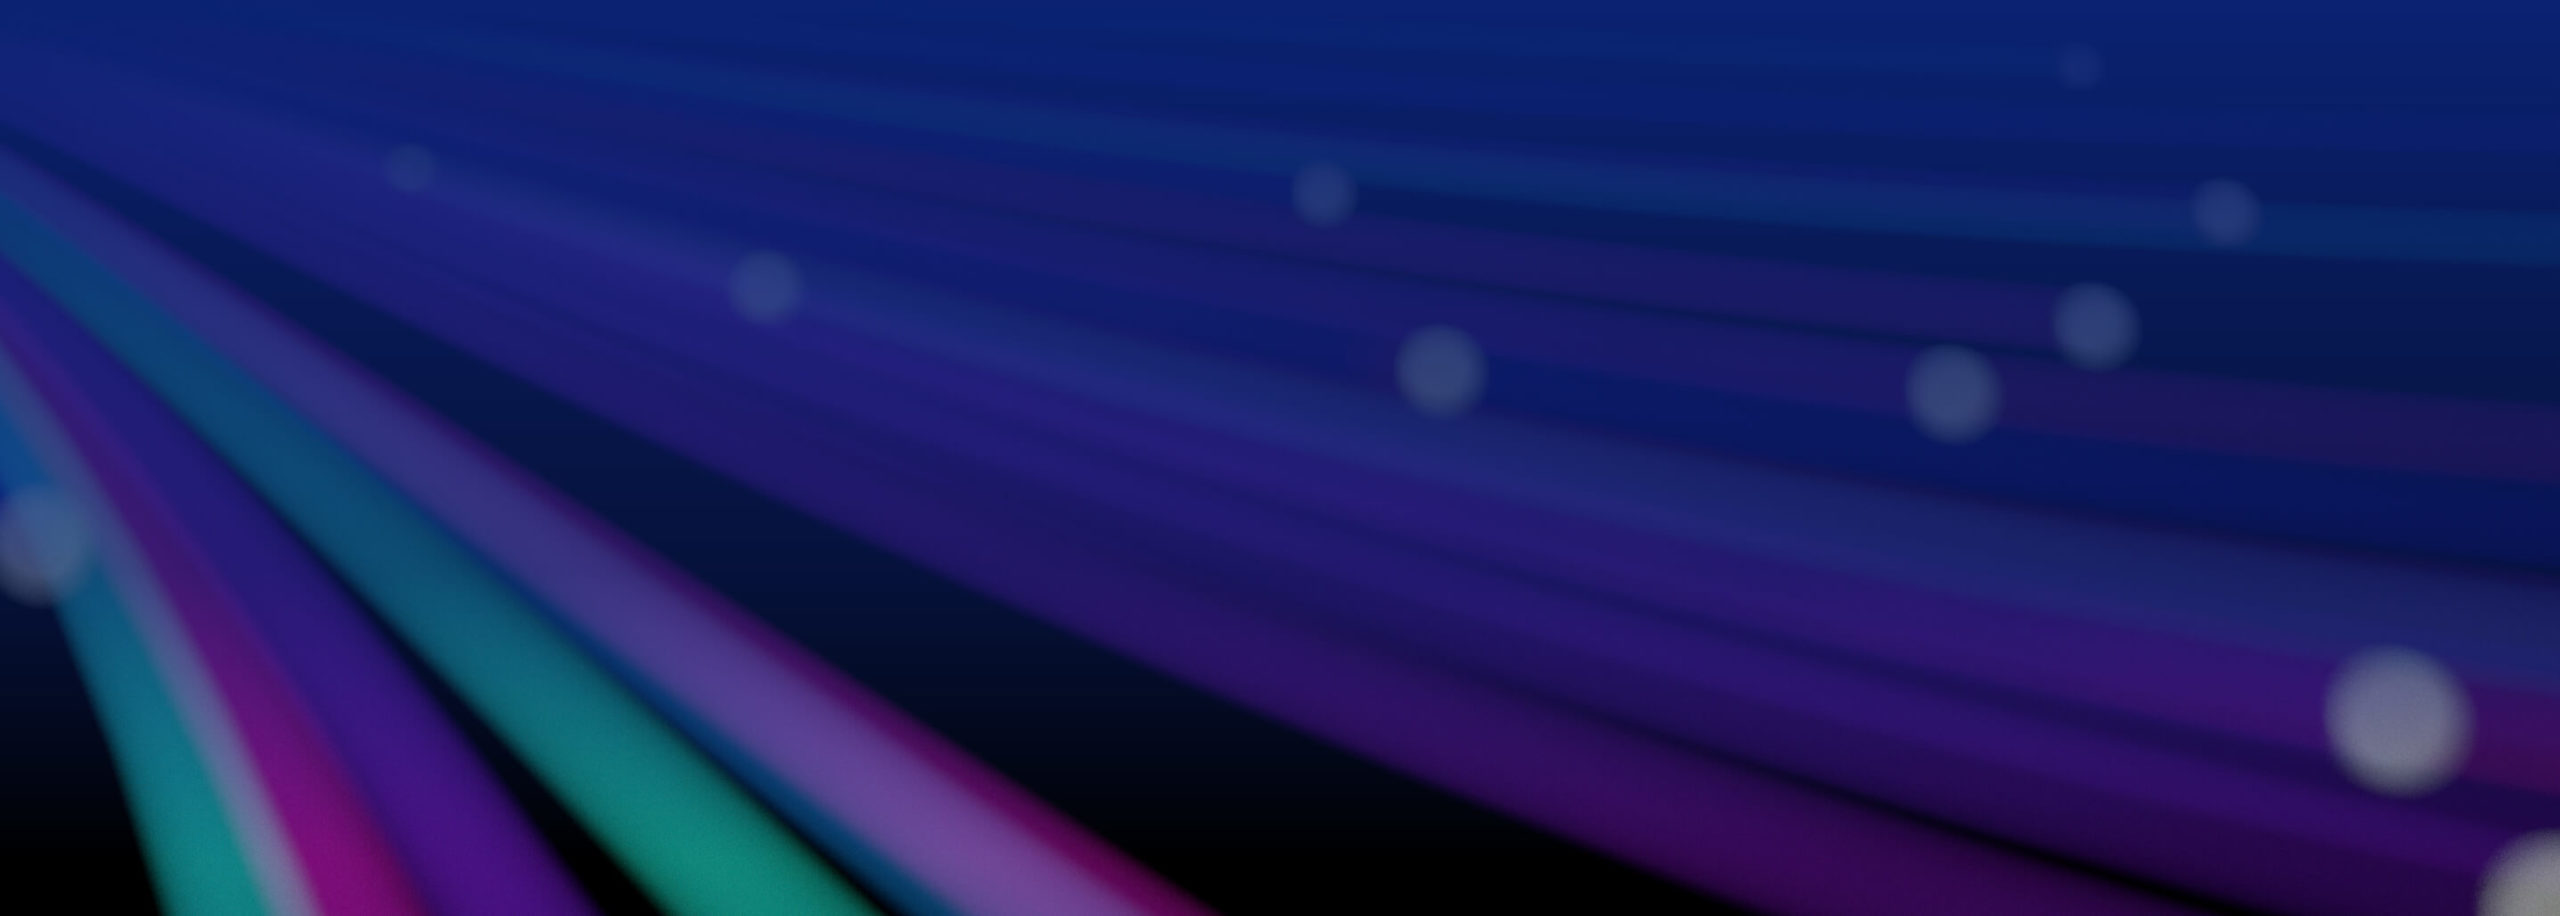 Close, out of focus image of abstract glowing spiral lines of bright purple, green and blue.